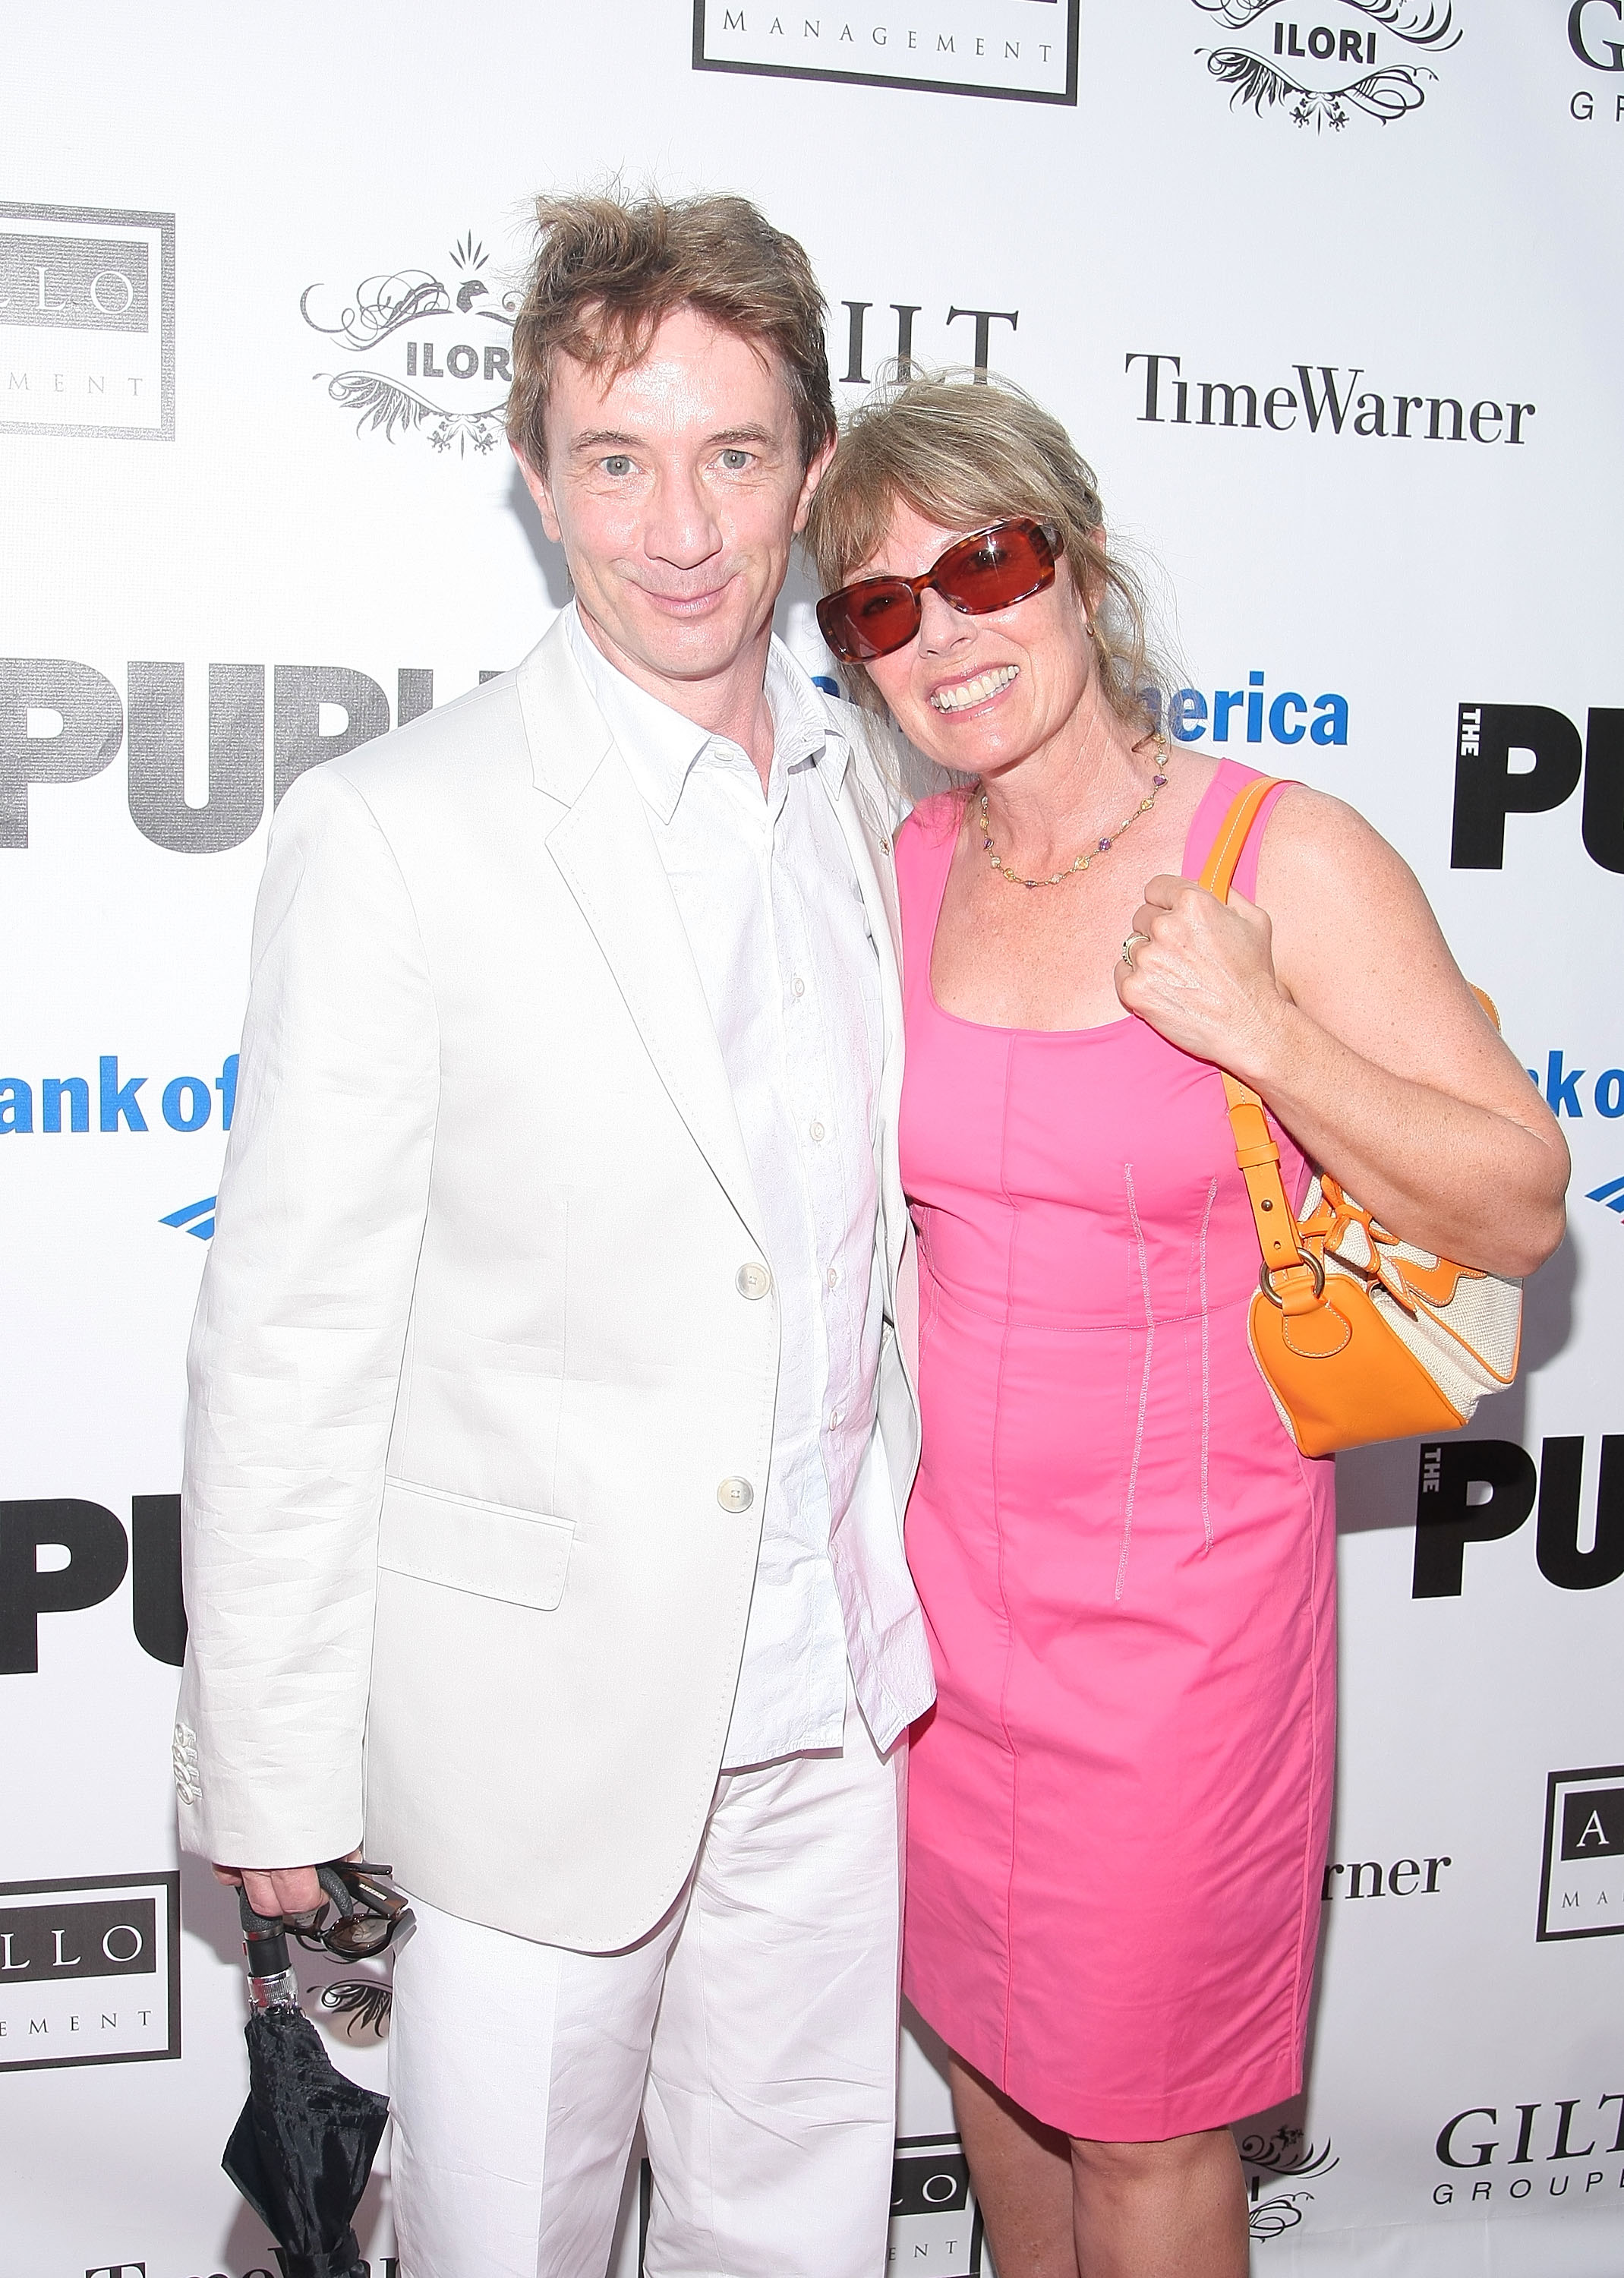 Martin Short and Nancy Dolman attend the 2009 Shakespeare in the Park opening night gala performance of "Twelfth Night" at the Delacorte Theater on June 25, 2009, in New York City. | Source: Getty Images